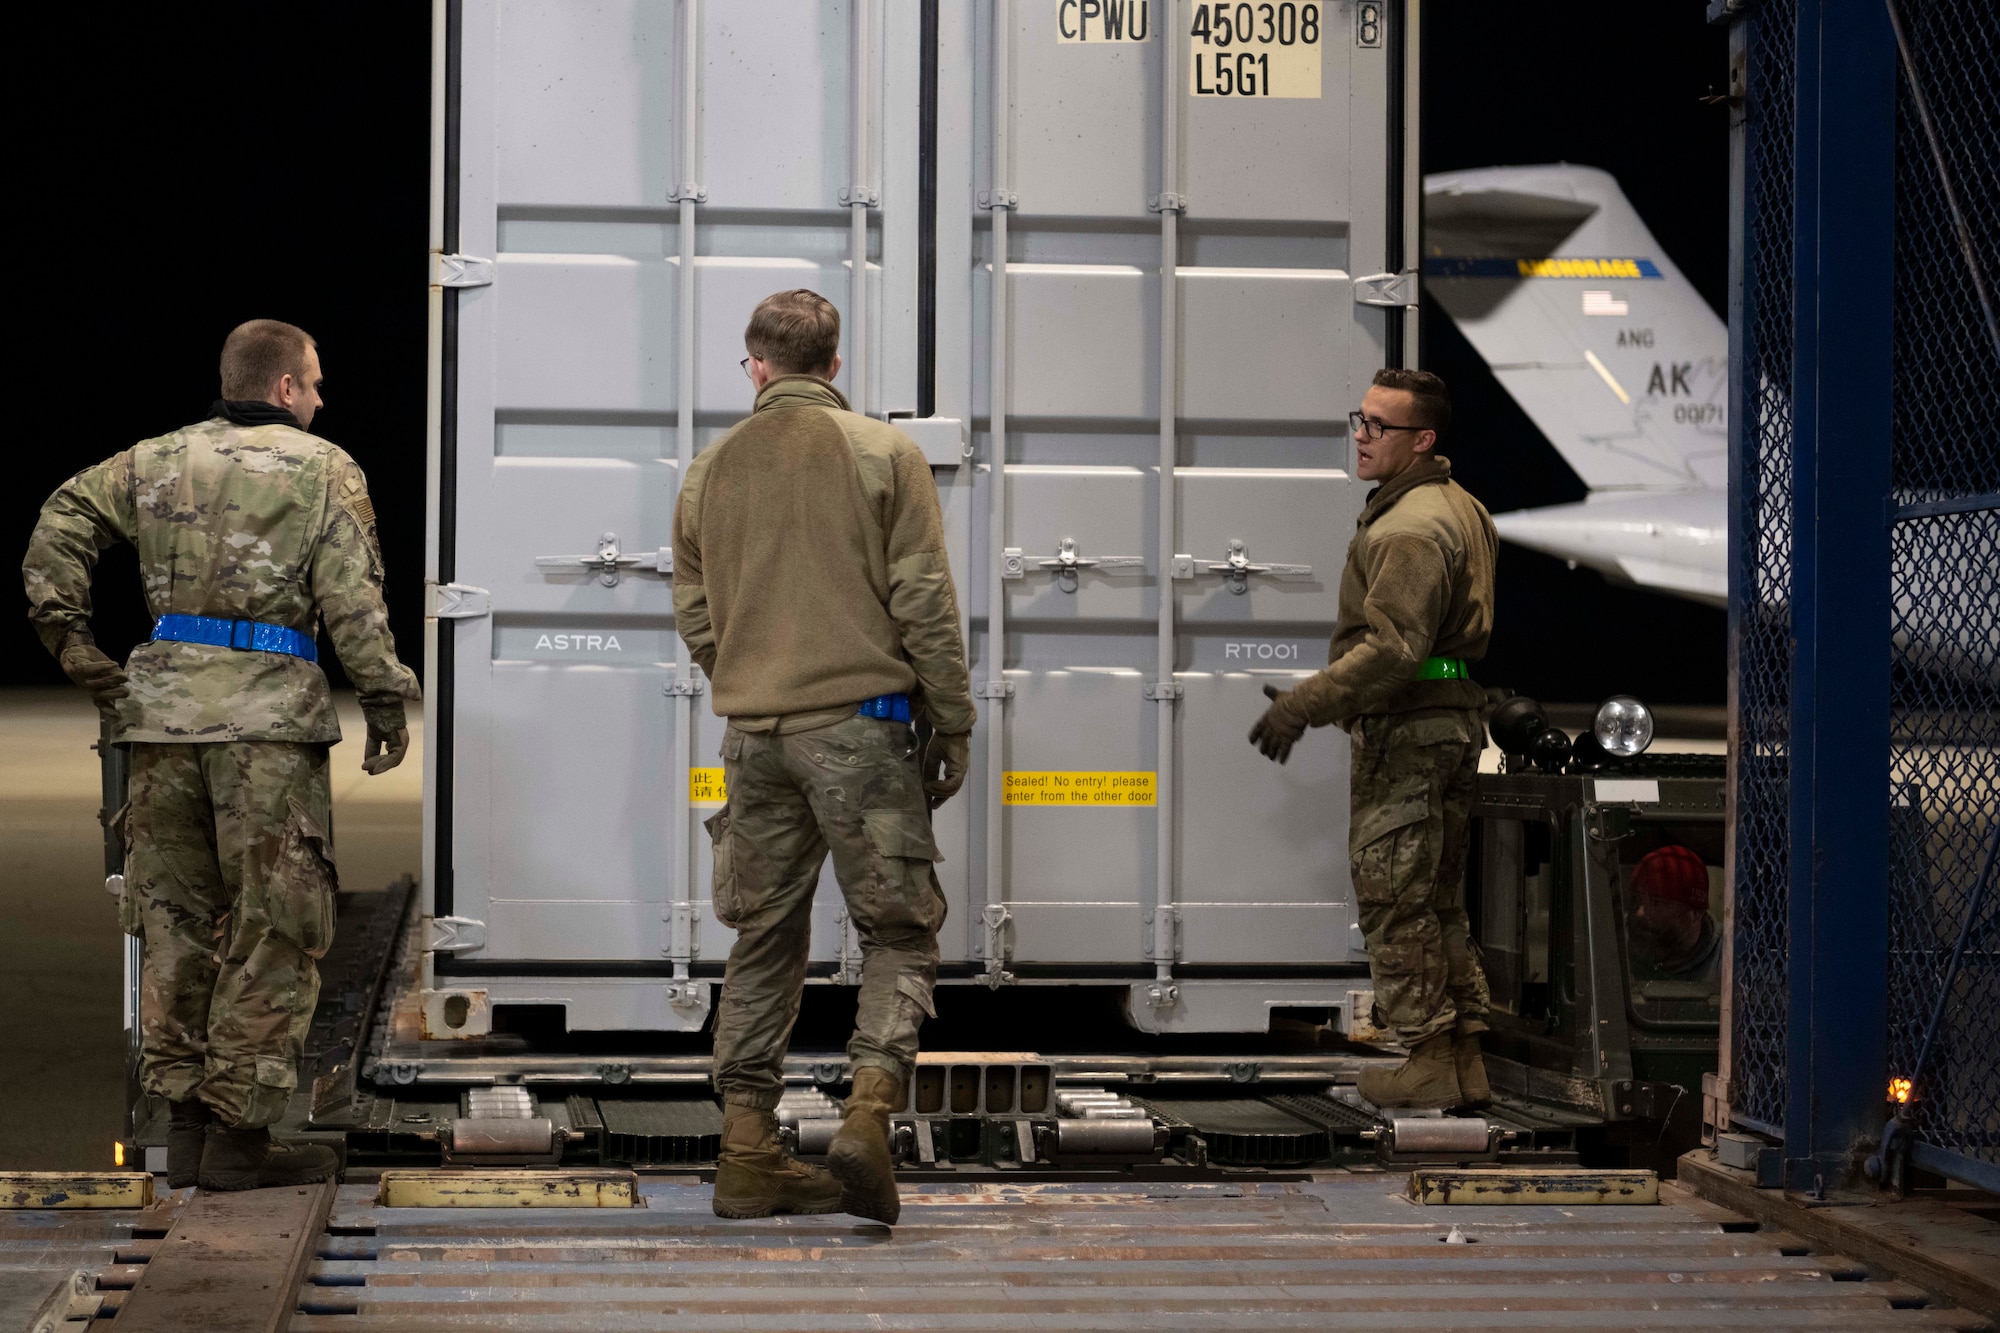 Airman stand by shipping container